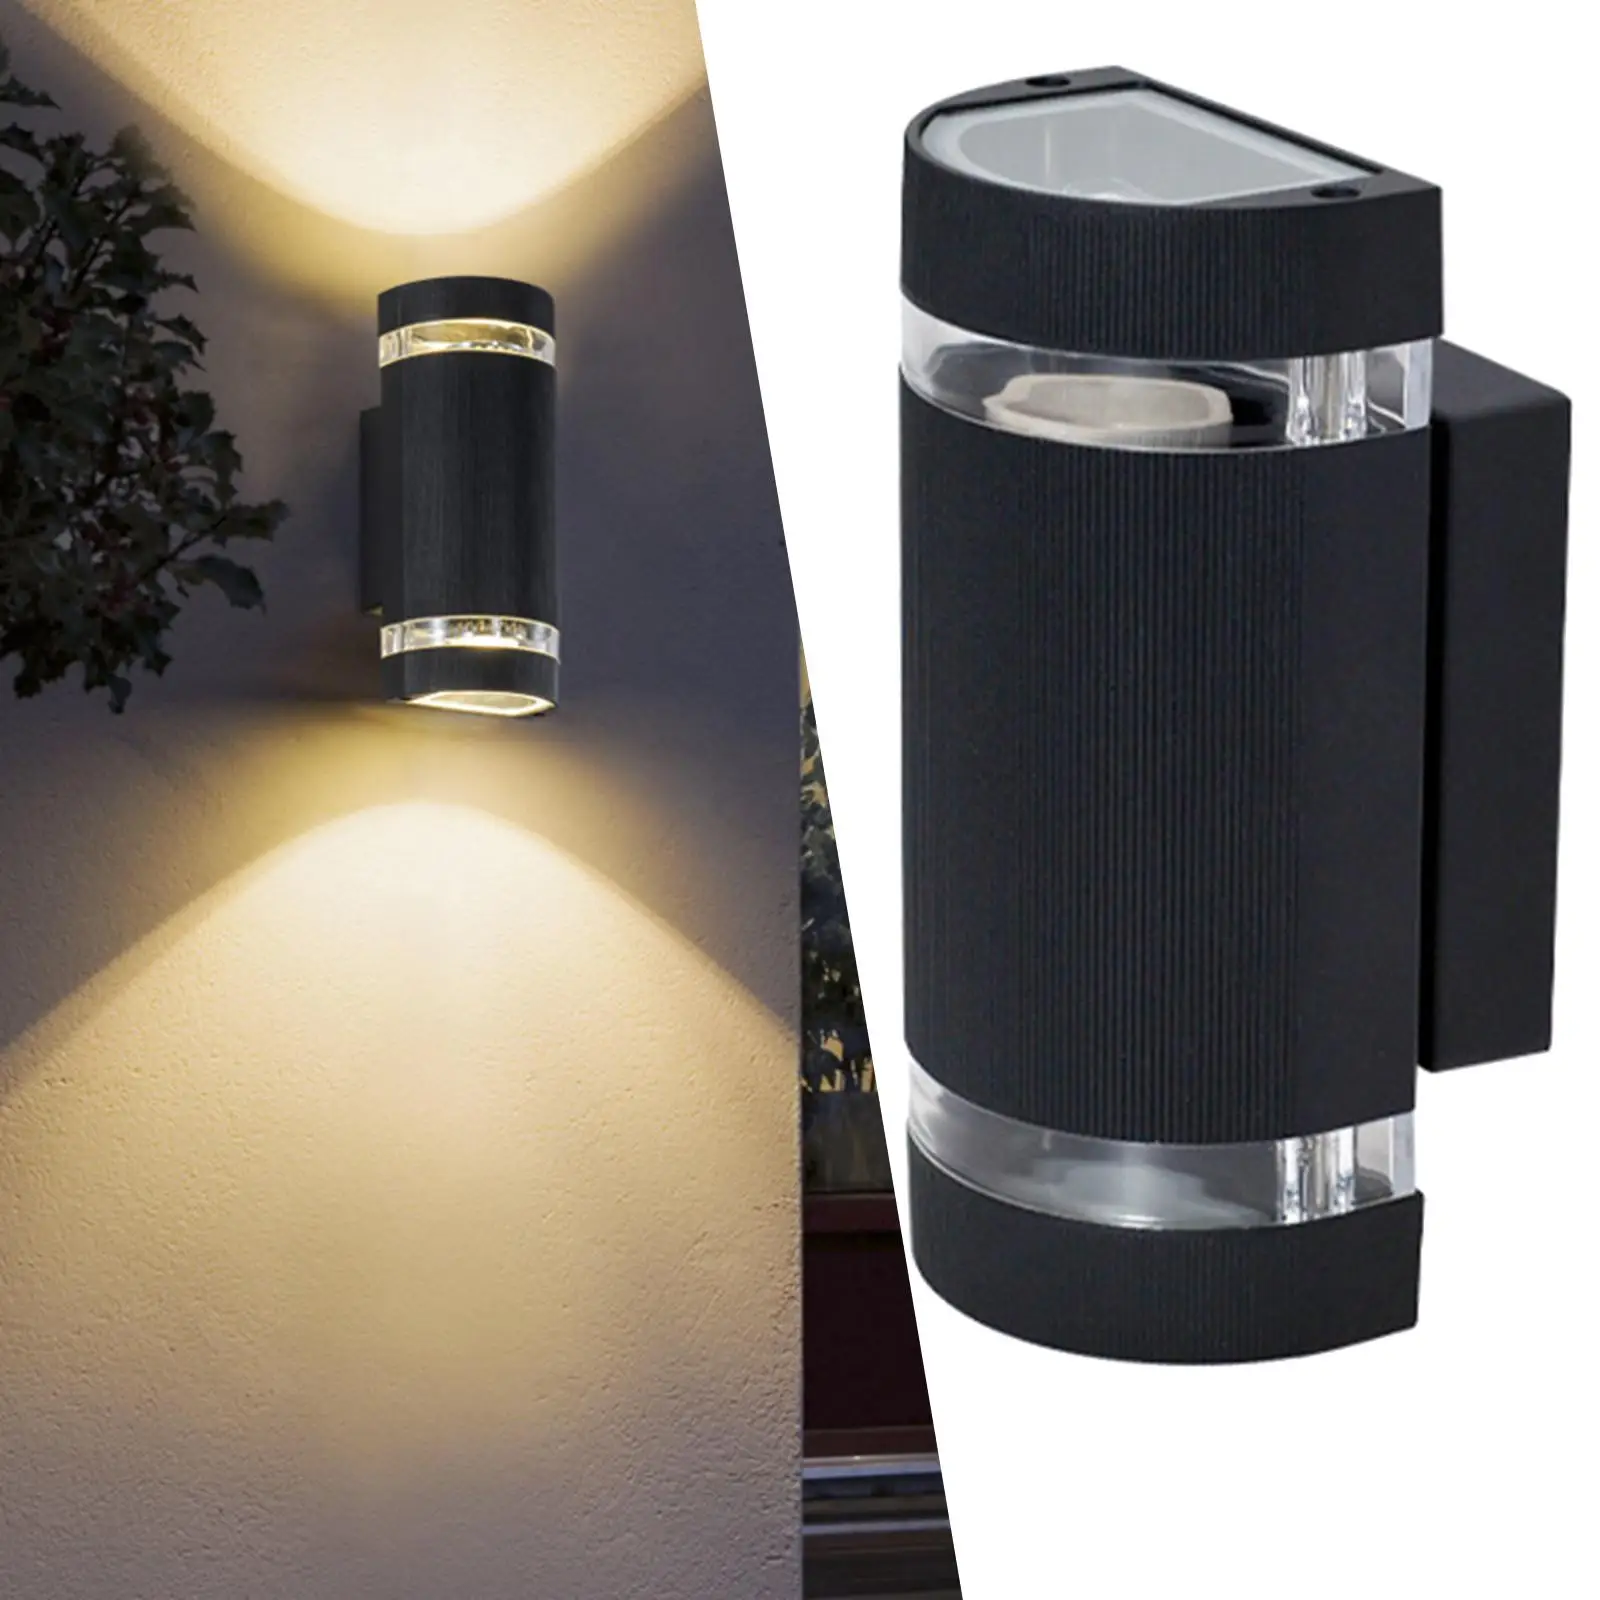 Outdoor LED Wall Lights Water Wall Sconce Lighting E26 Wall Mount Lamp Fixtures for Garden Porch Garage Courtyard